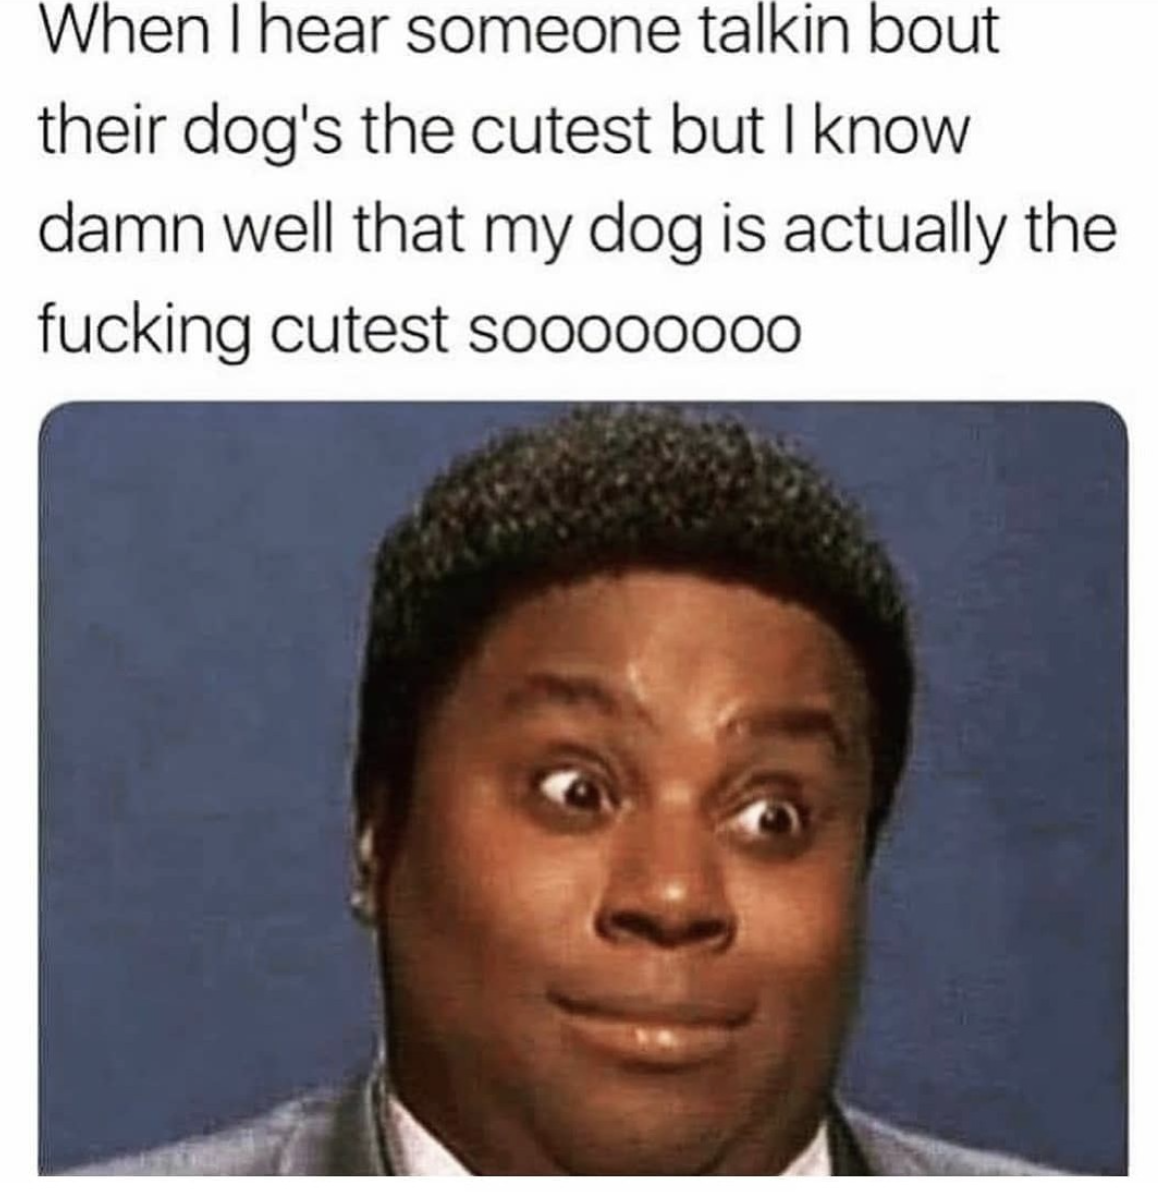 ...&quot;but I know damn well that my dog is actually the fucking cutest sooooooo&quot;